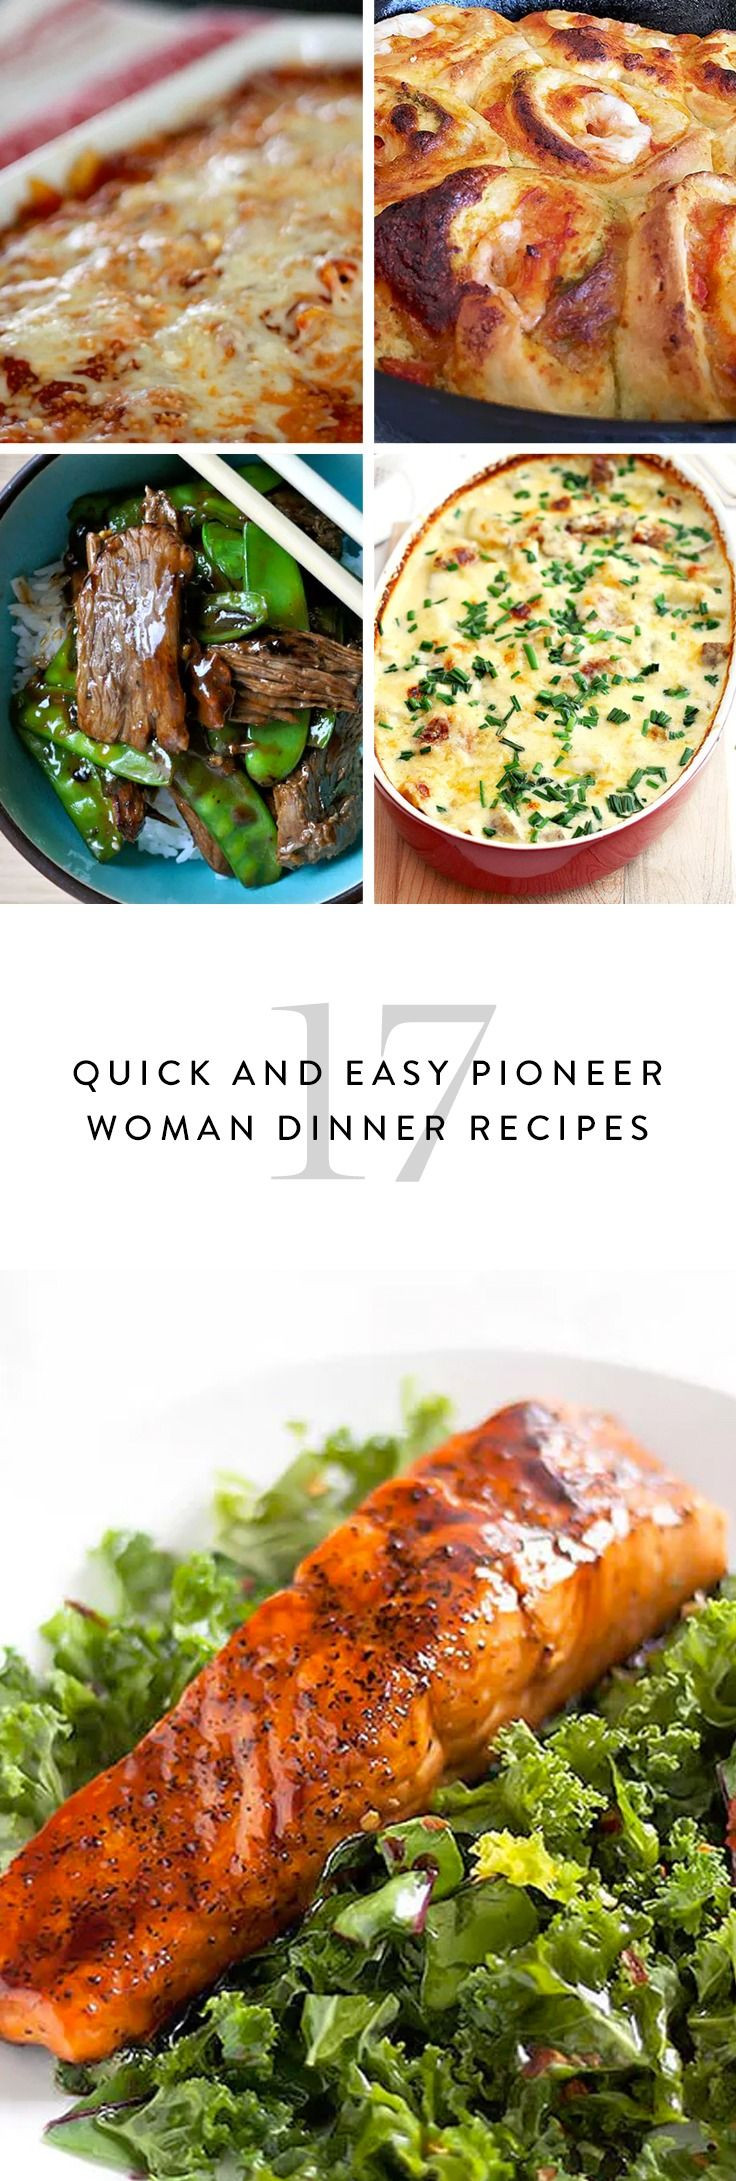 Pioneer Woman Dinner Recipes
 17 Pioneer Woman Dinner Recipes That Are Quick Easy and